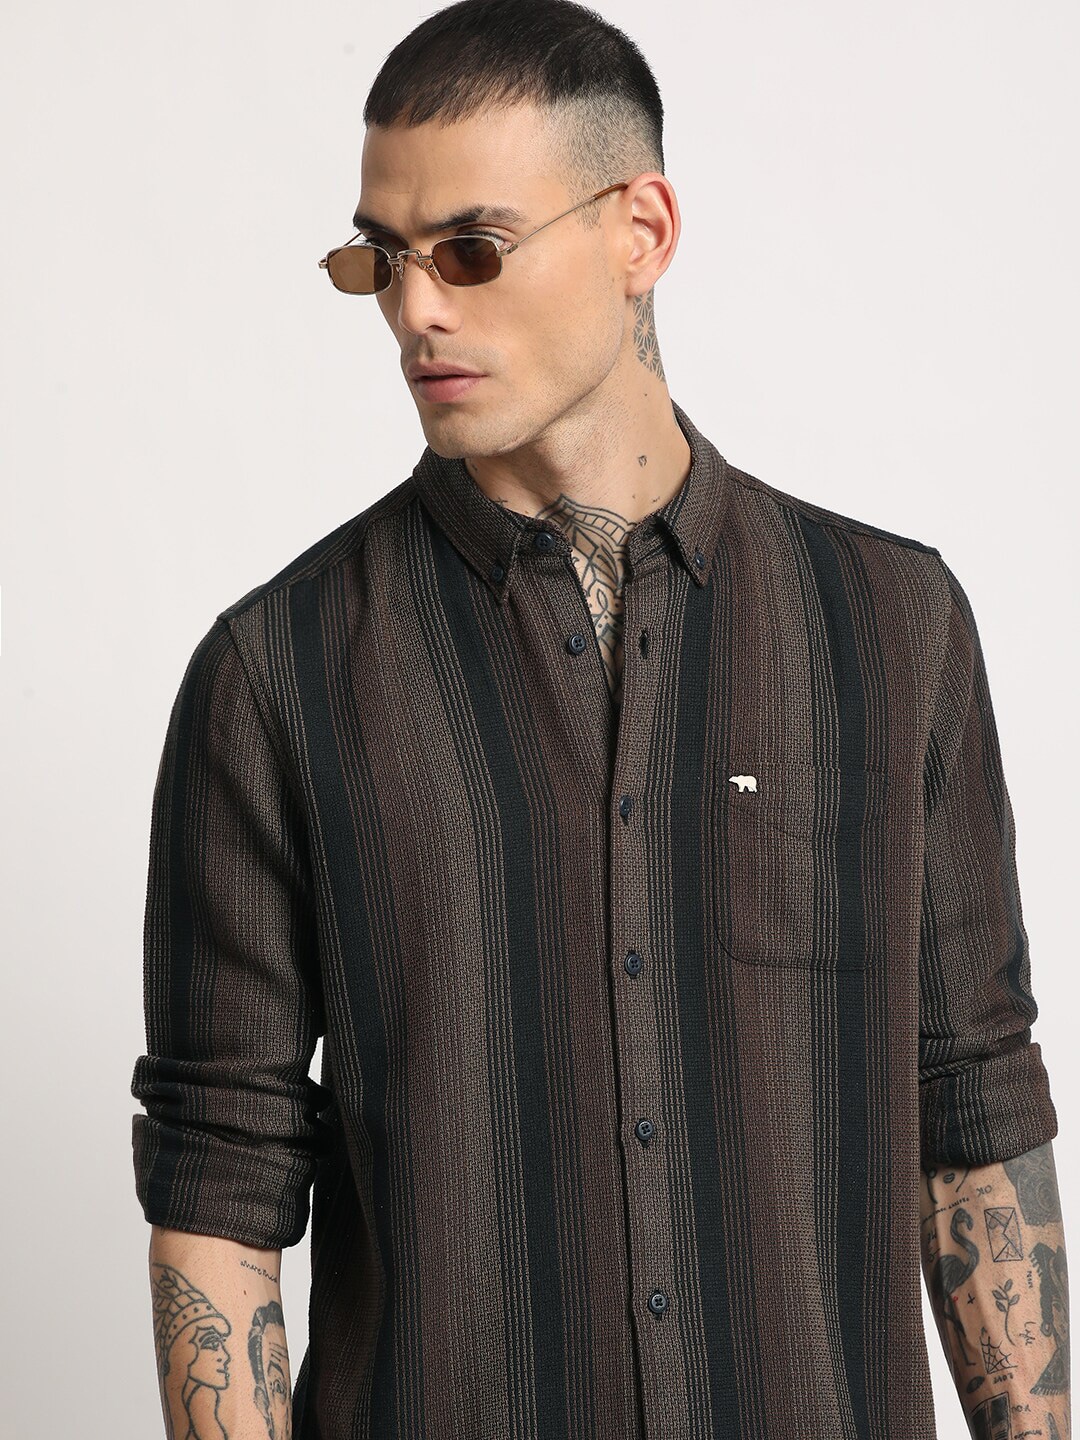 THE BEAR HOUSE Striped Slim Fit Button-Down Collar Casual Shirt